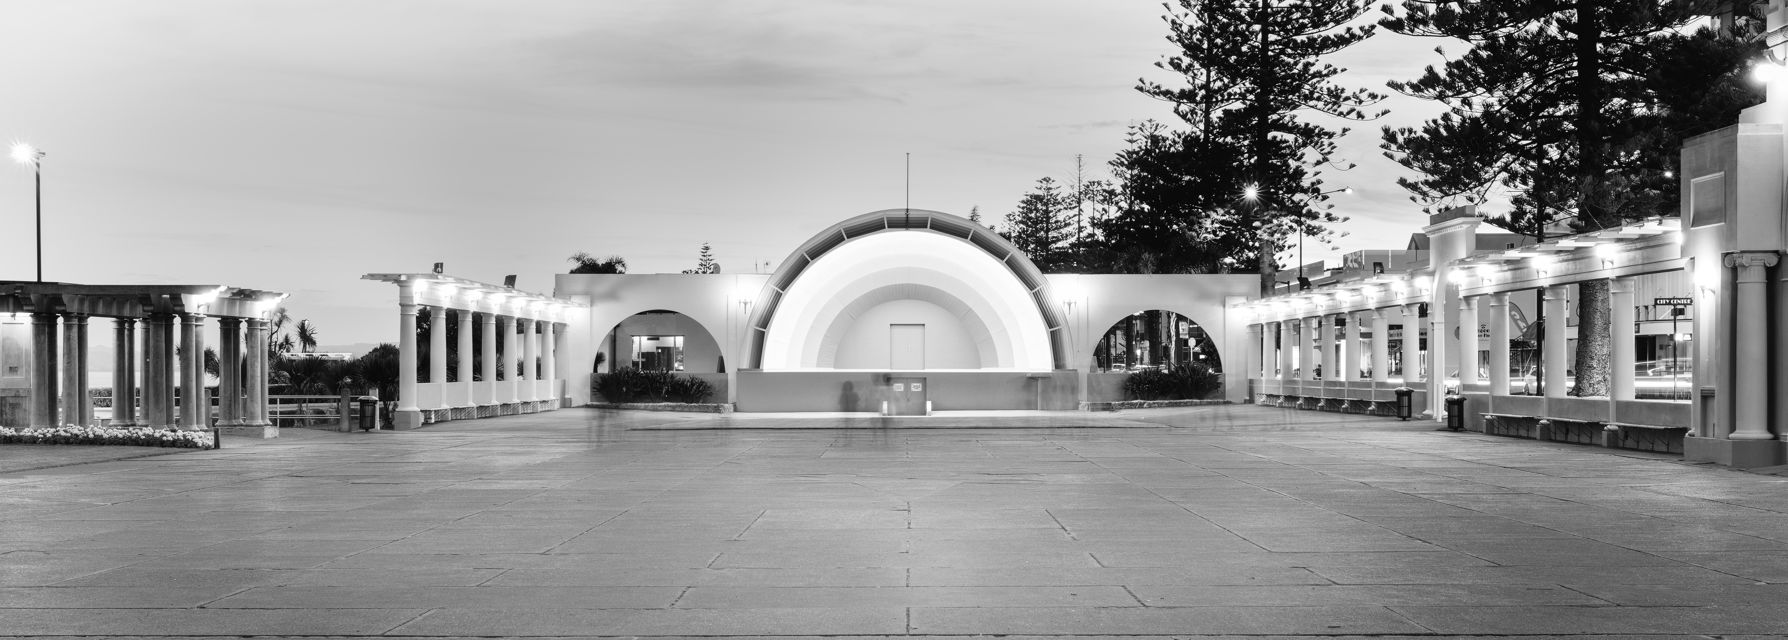 Napier Soundshell B&W - A long exposure of a small group of people at the Napier Soundshell in Hawke's Bay, New Zealand